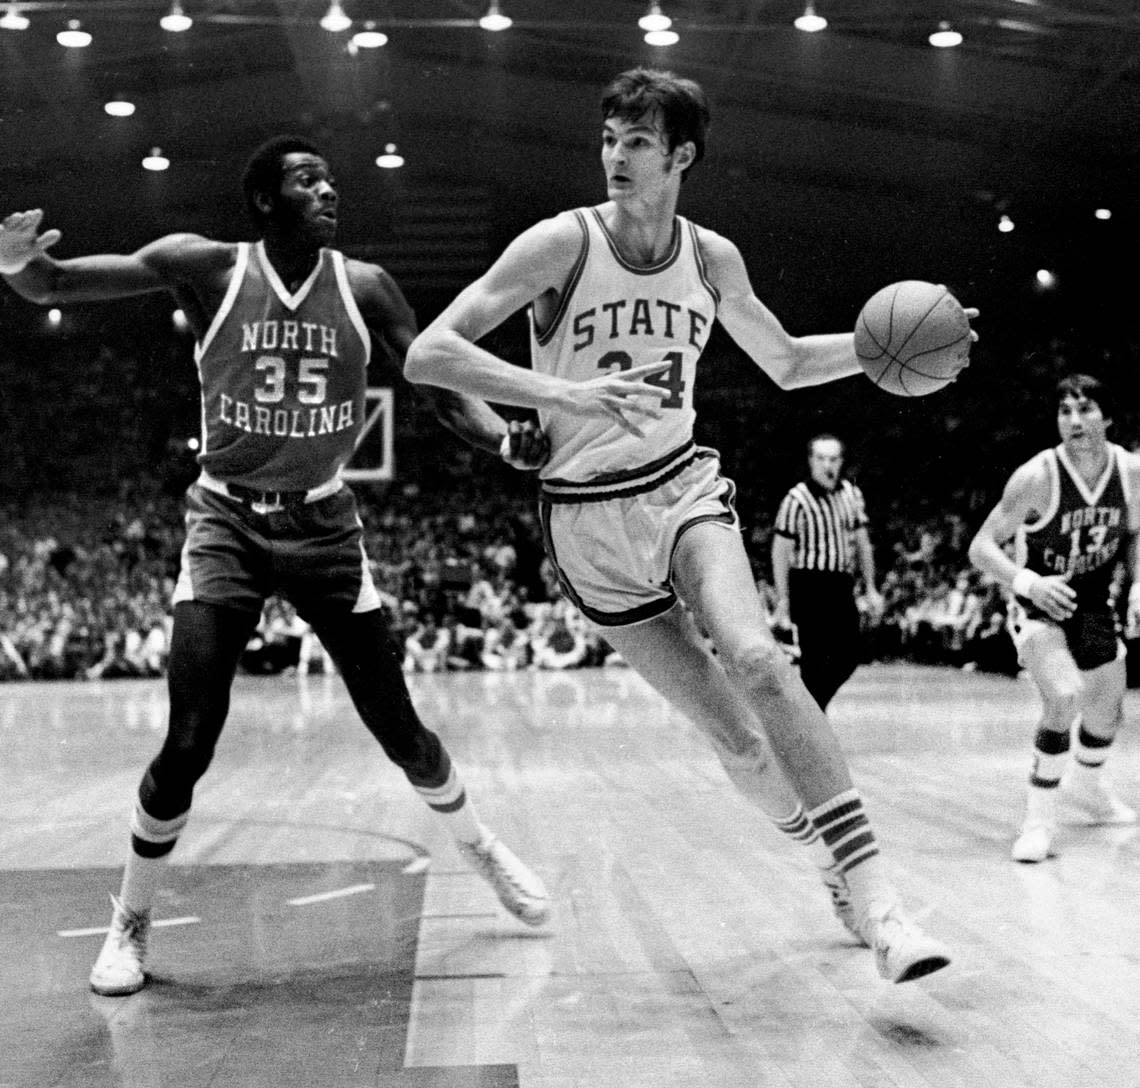 NC State’s Tommy Burleson drives to the basket against the defense of UNC’s Bob McAdoo during a game in Reynolds Coliseum in Raleigh, NC March 4, 1972.